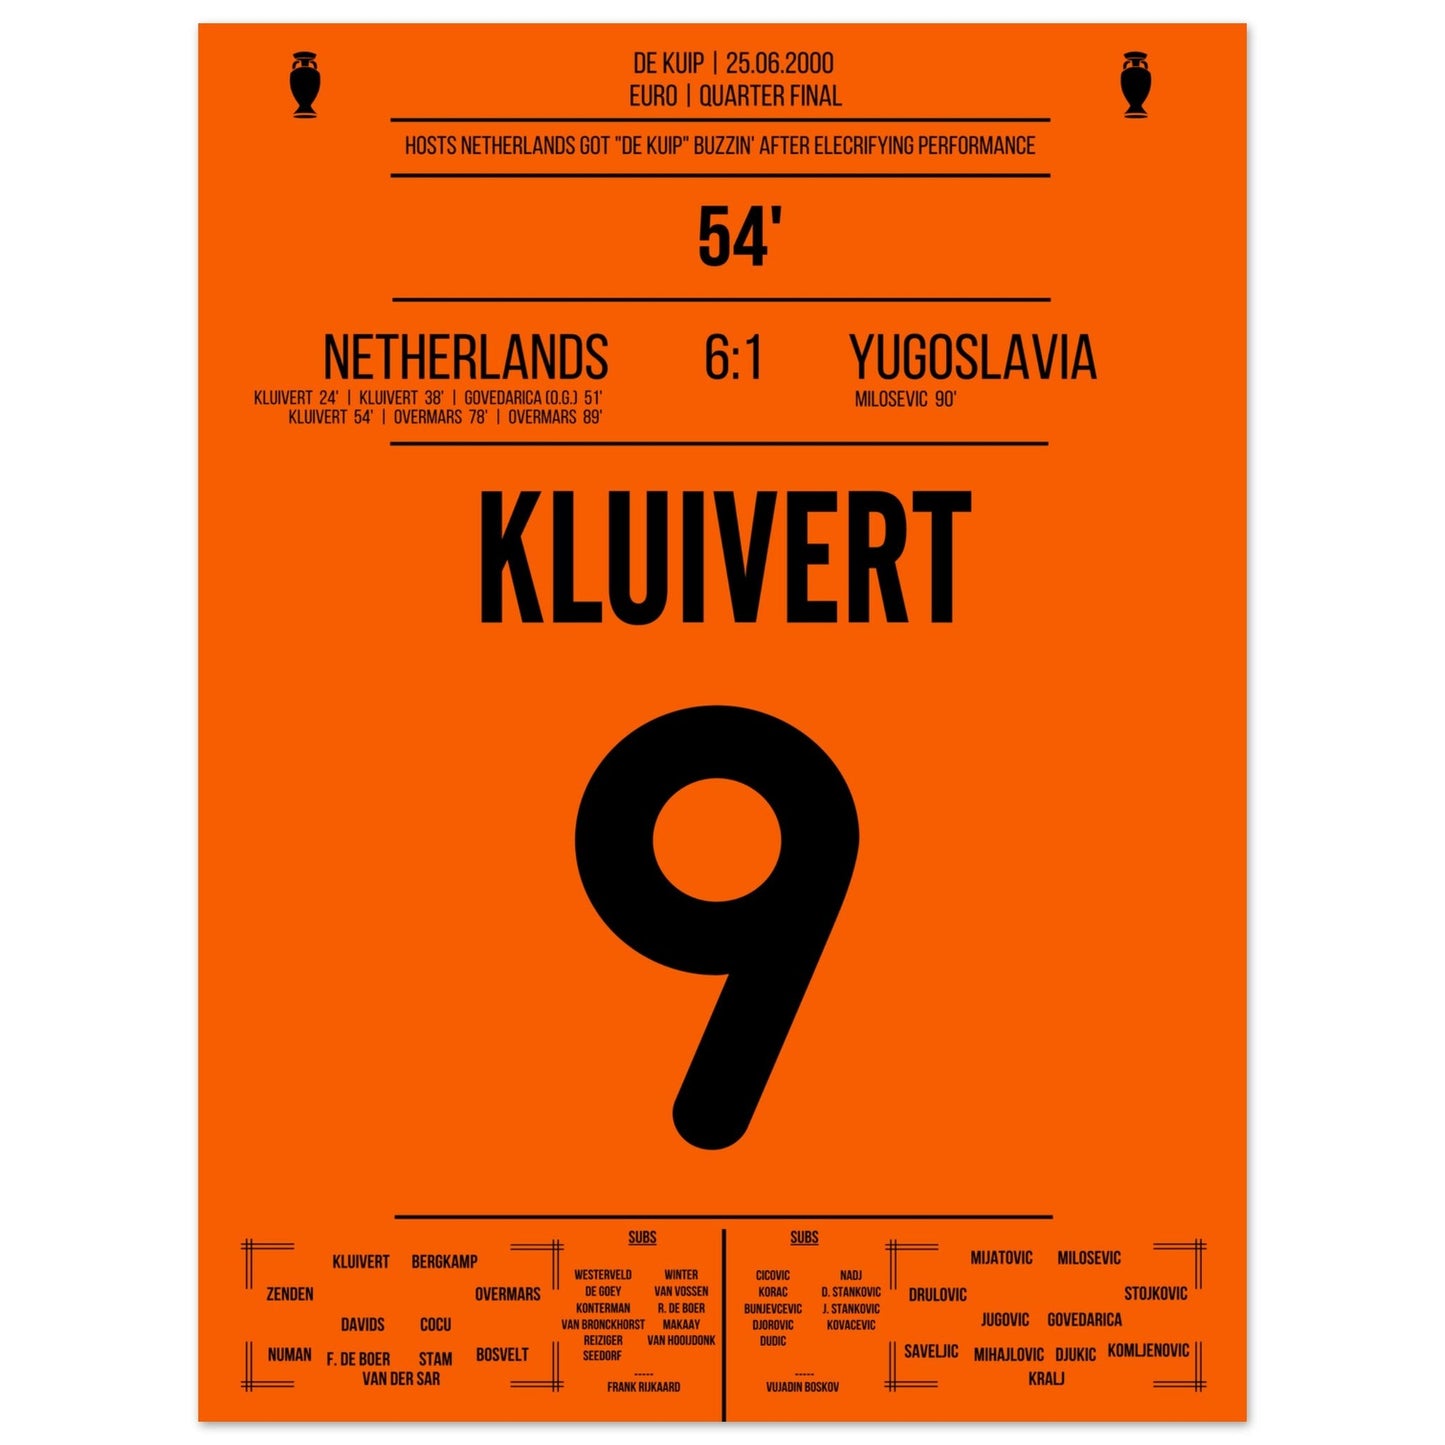 Kluivert's hat-trick in the Euro 2000 quarter-finals